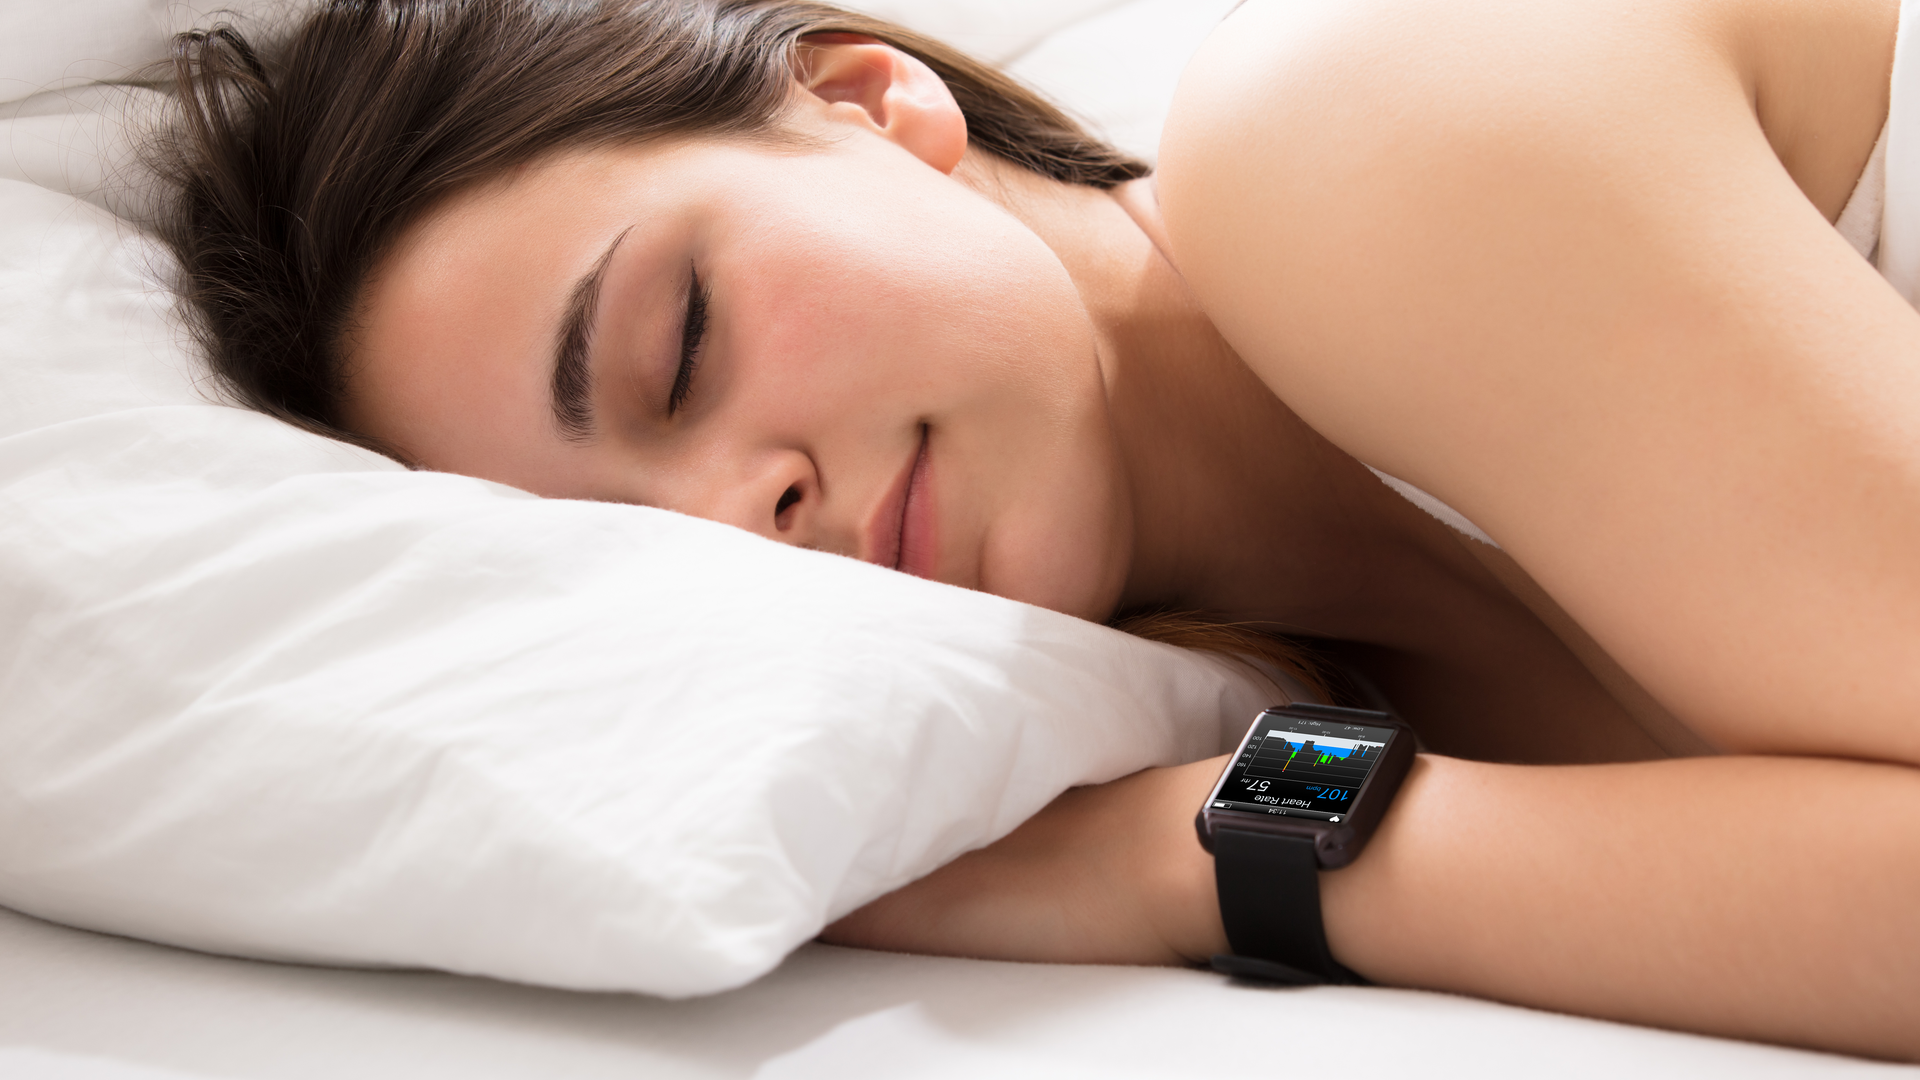 Person Sleeping On Bed With Smart Watch Showing Heartbeat Monitor